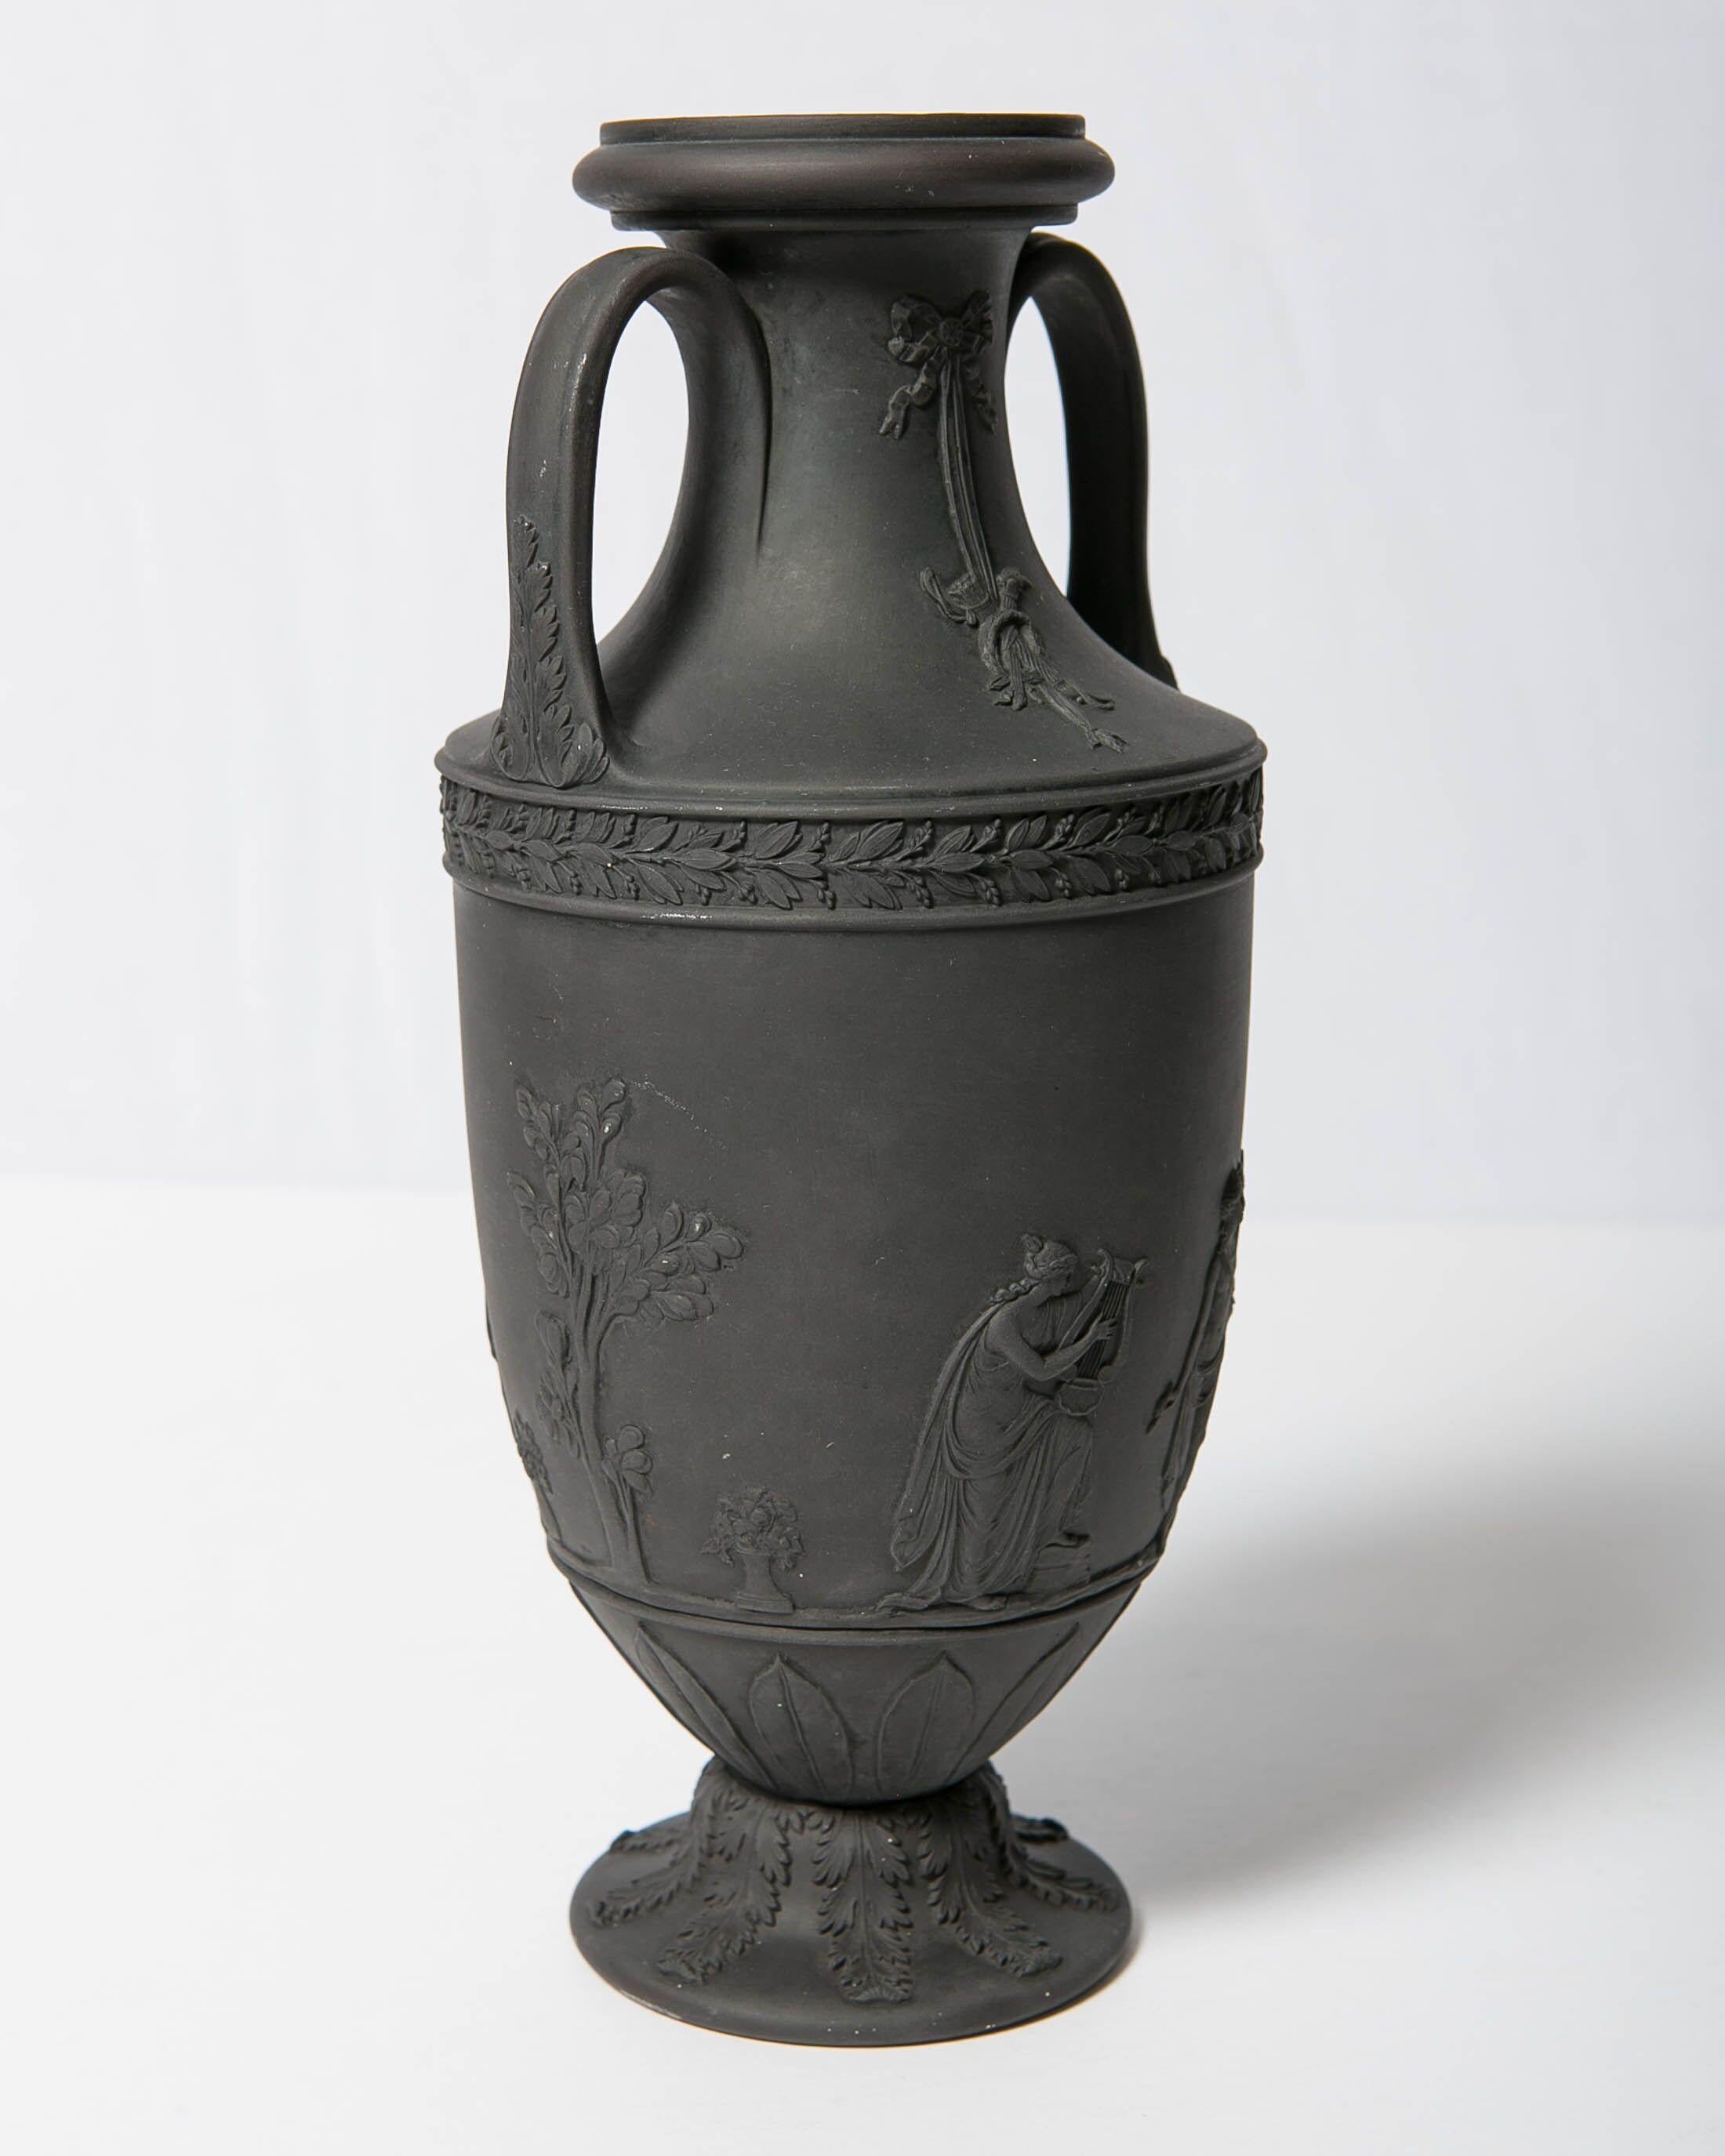 19th Century Wedgwood Black Basalt Vase with Classical Figures Made in England, circa 1840